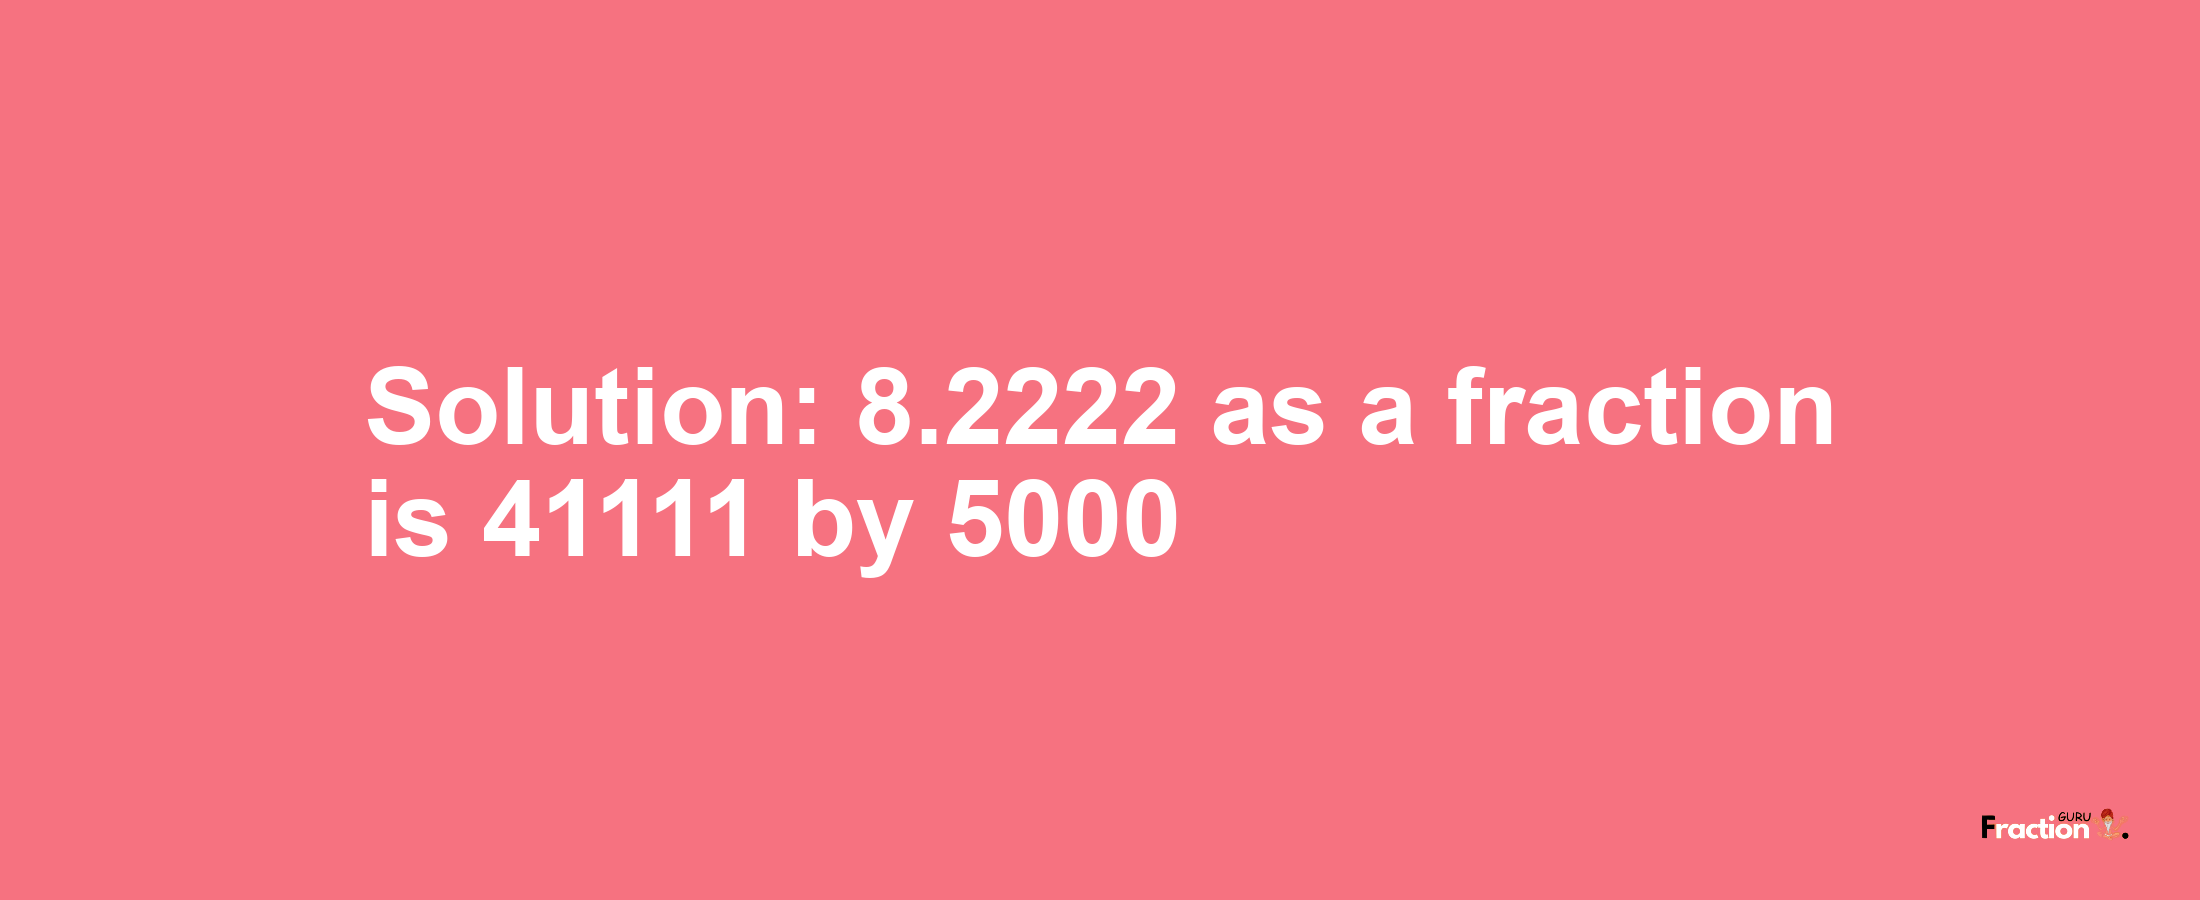 Solution:8.2222 as a fraction is 41111/5000